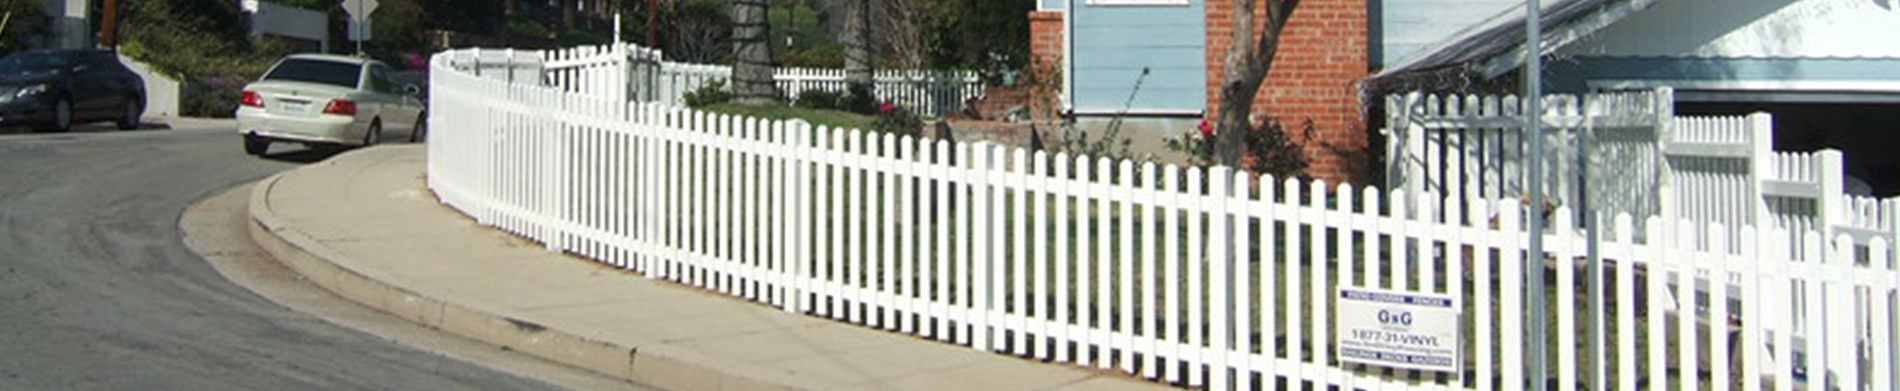 Install ASTM certified vinyl fenceing around your yard